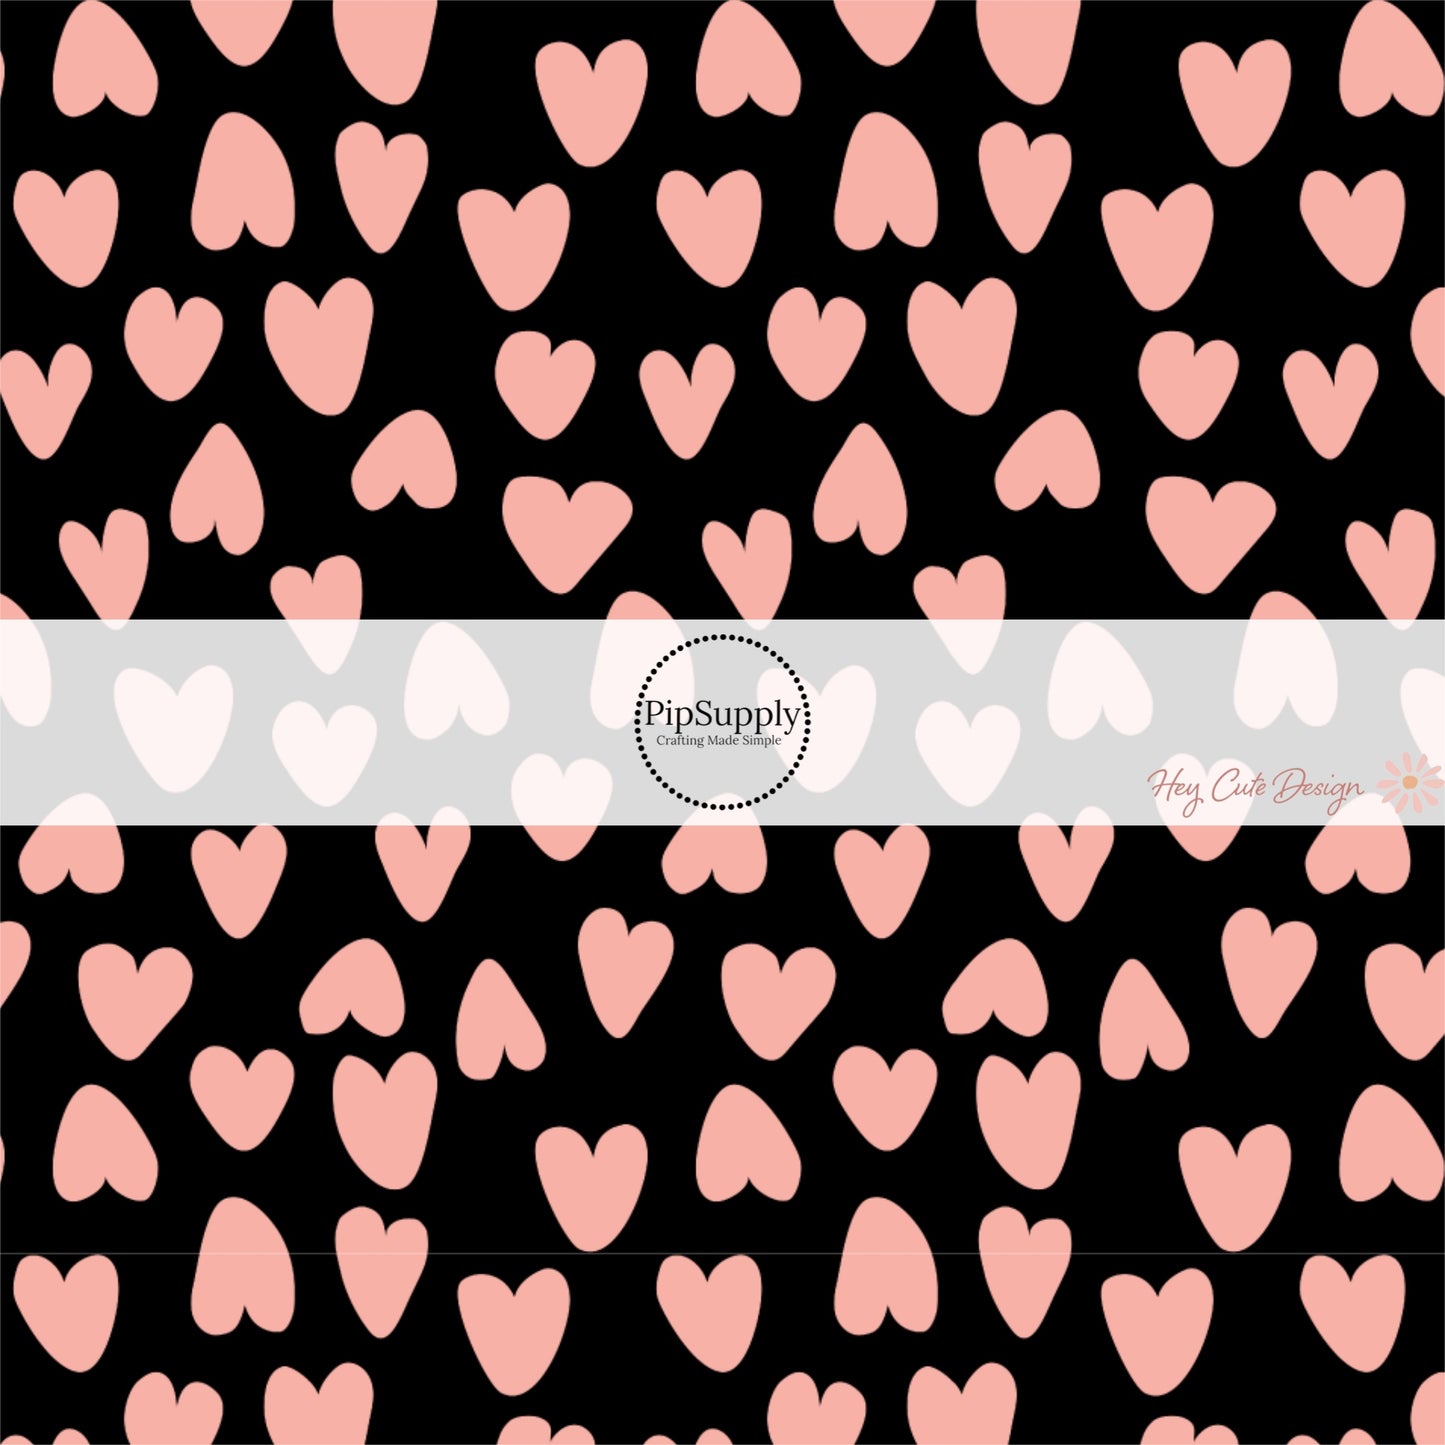 These heart and spot themed black no sew bow strips can be easily tied and attached to a clip for a finished hair bow. These fun animal themed bow strips with leopard pattern with hearts and spots in pink on black are great for personal use or to sell.